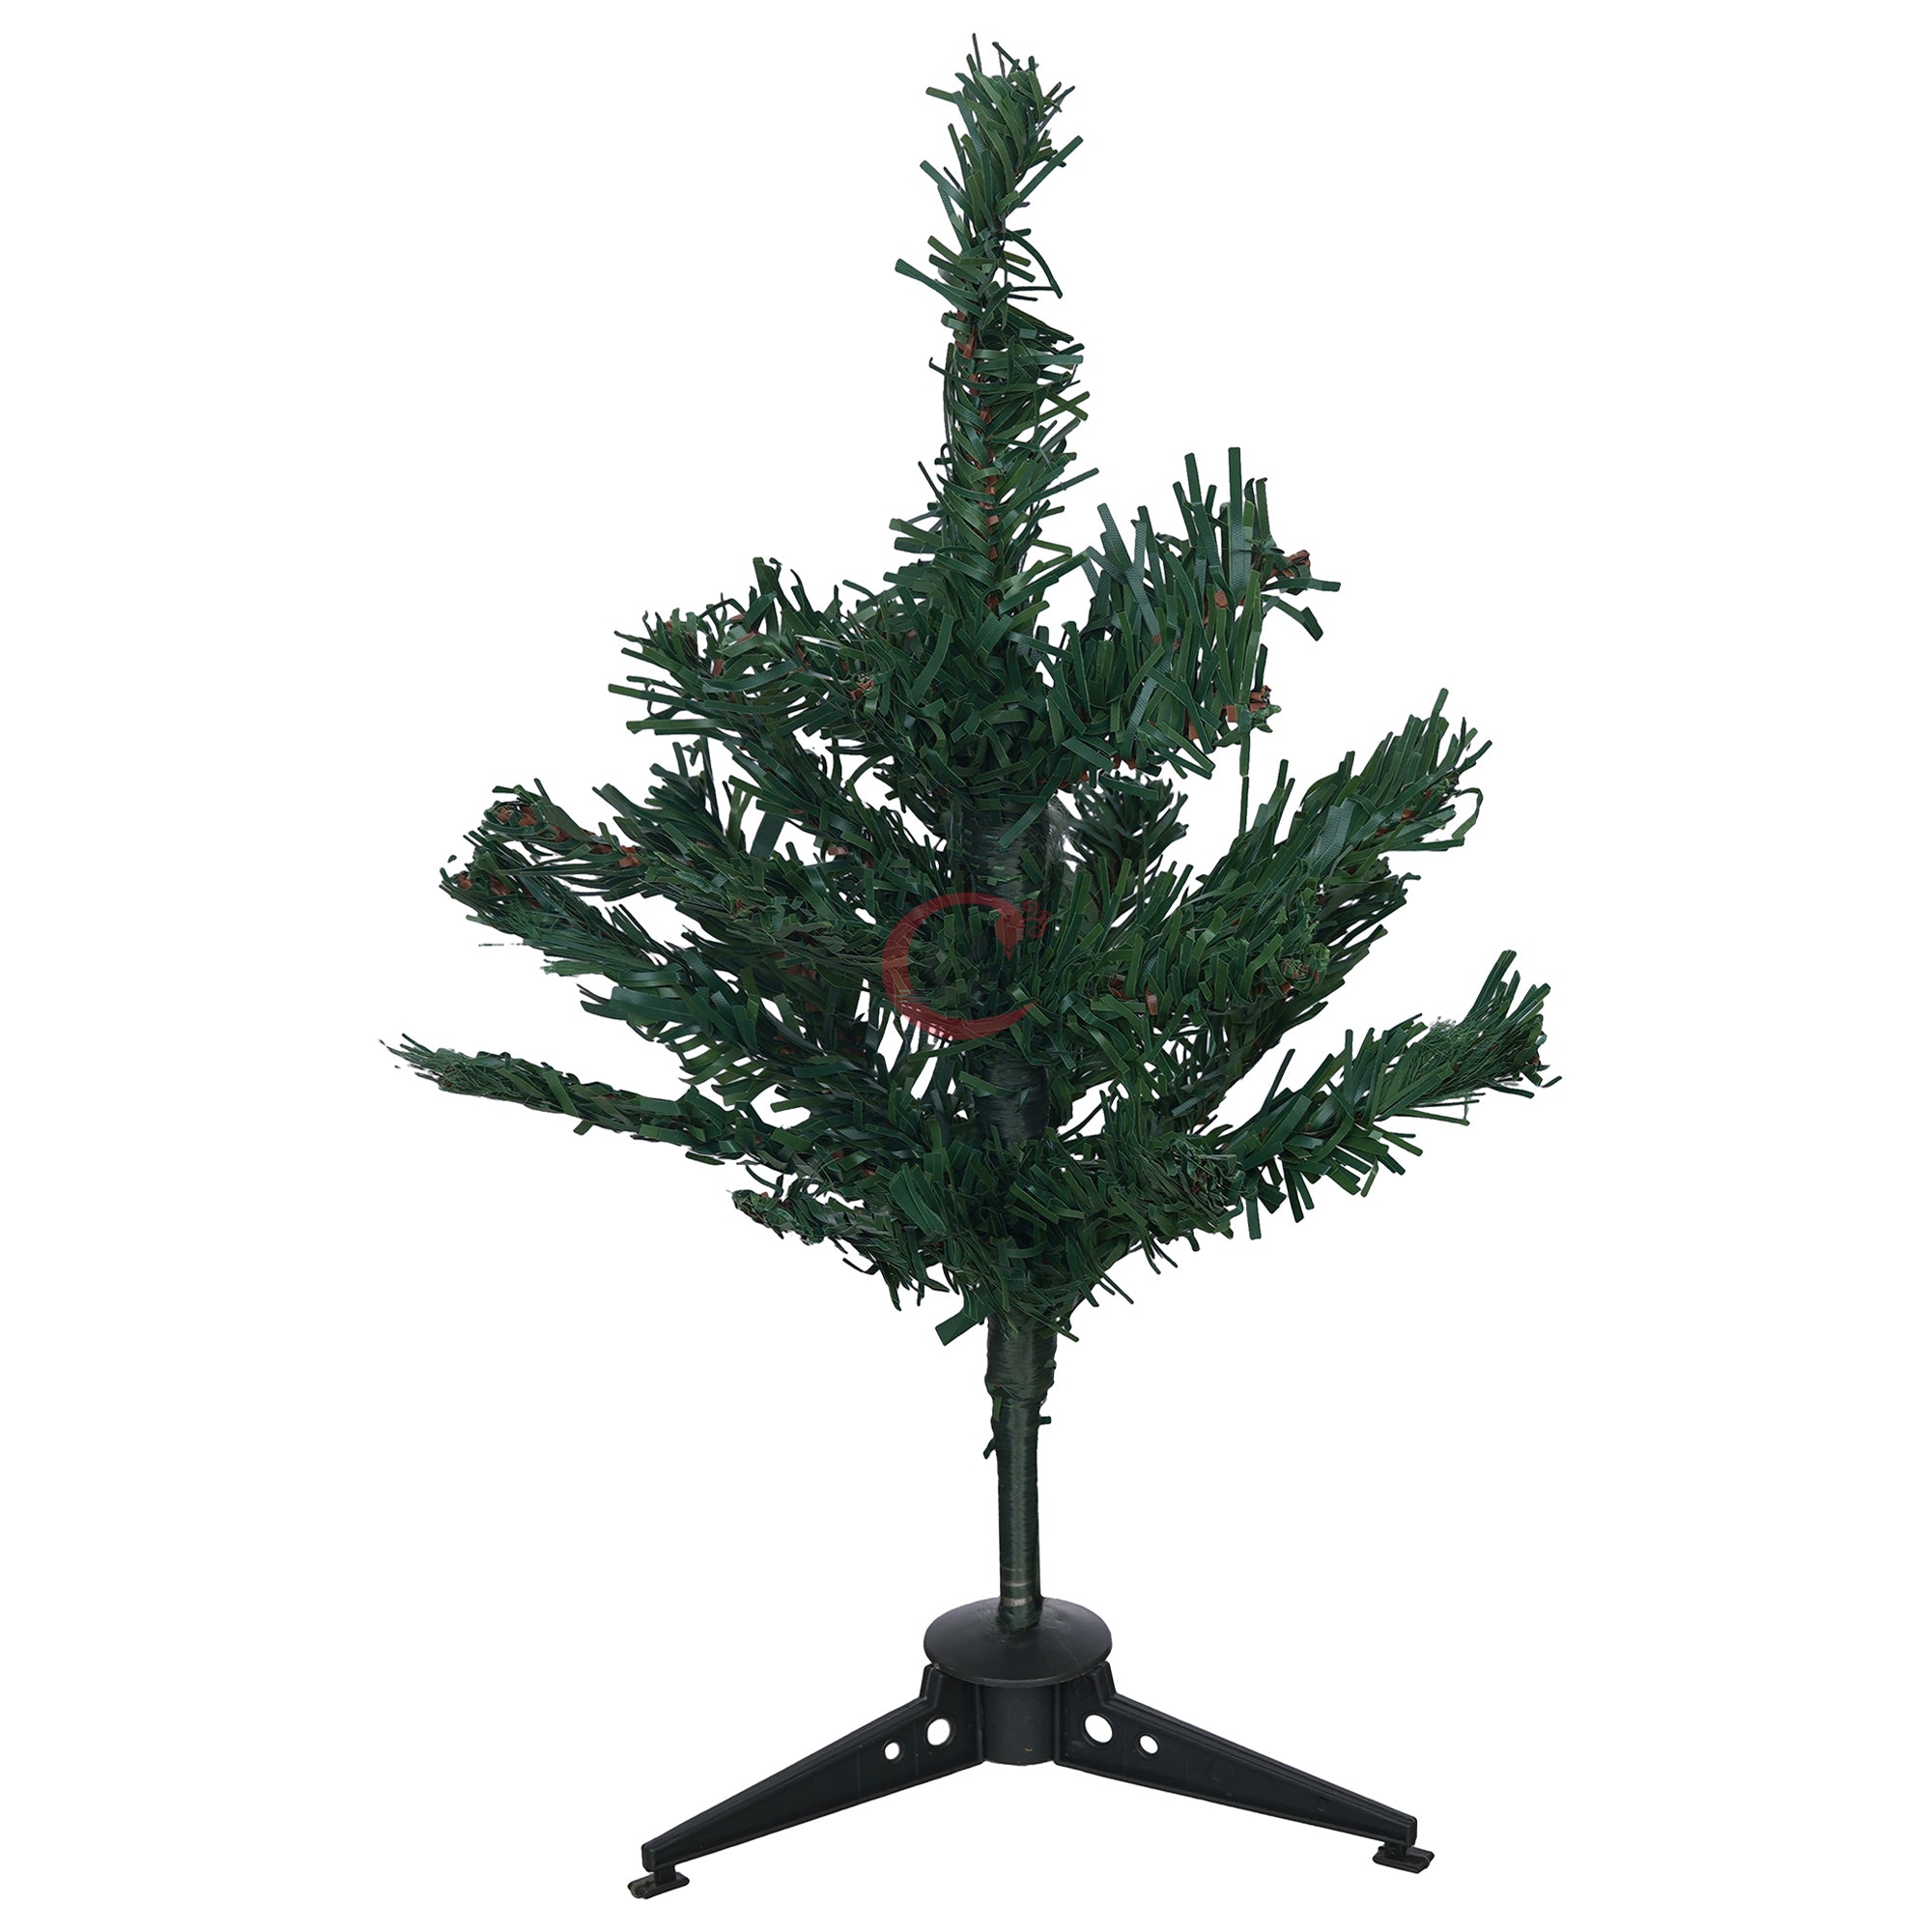 eCraftIndia 1 Feet Green Artificial Christmas Tree Xmas Pine Tree with Metal Stand - Xmas Tree for Indoor, Outdoor, Home, Living Room, Office, Church Decor - Merry Christmas Decoration Item 2